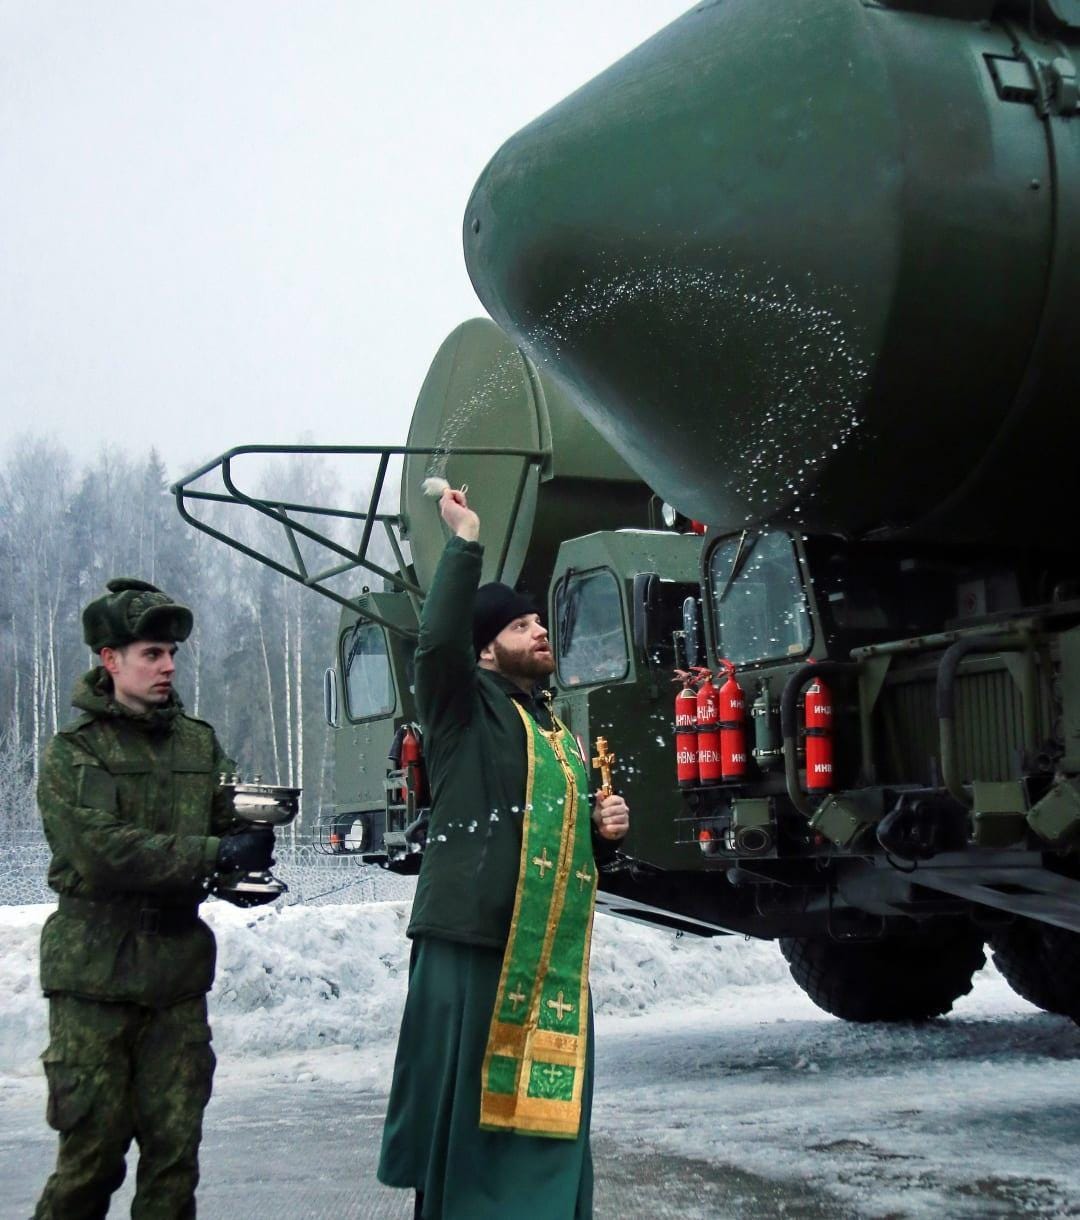 Russian priests should stop blessing nuclear weapons: Church proposal